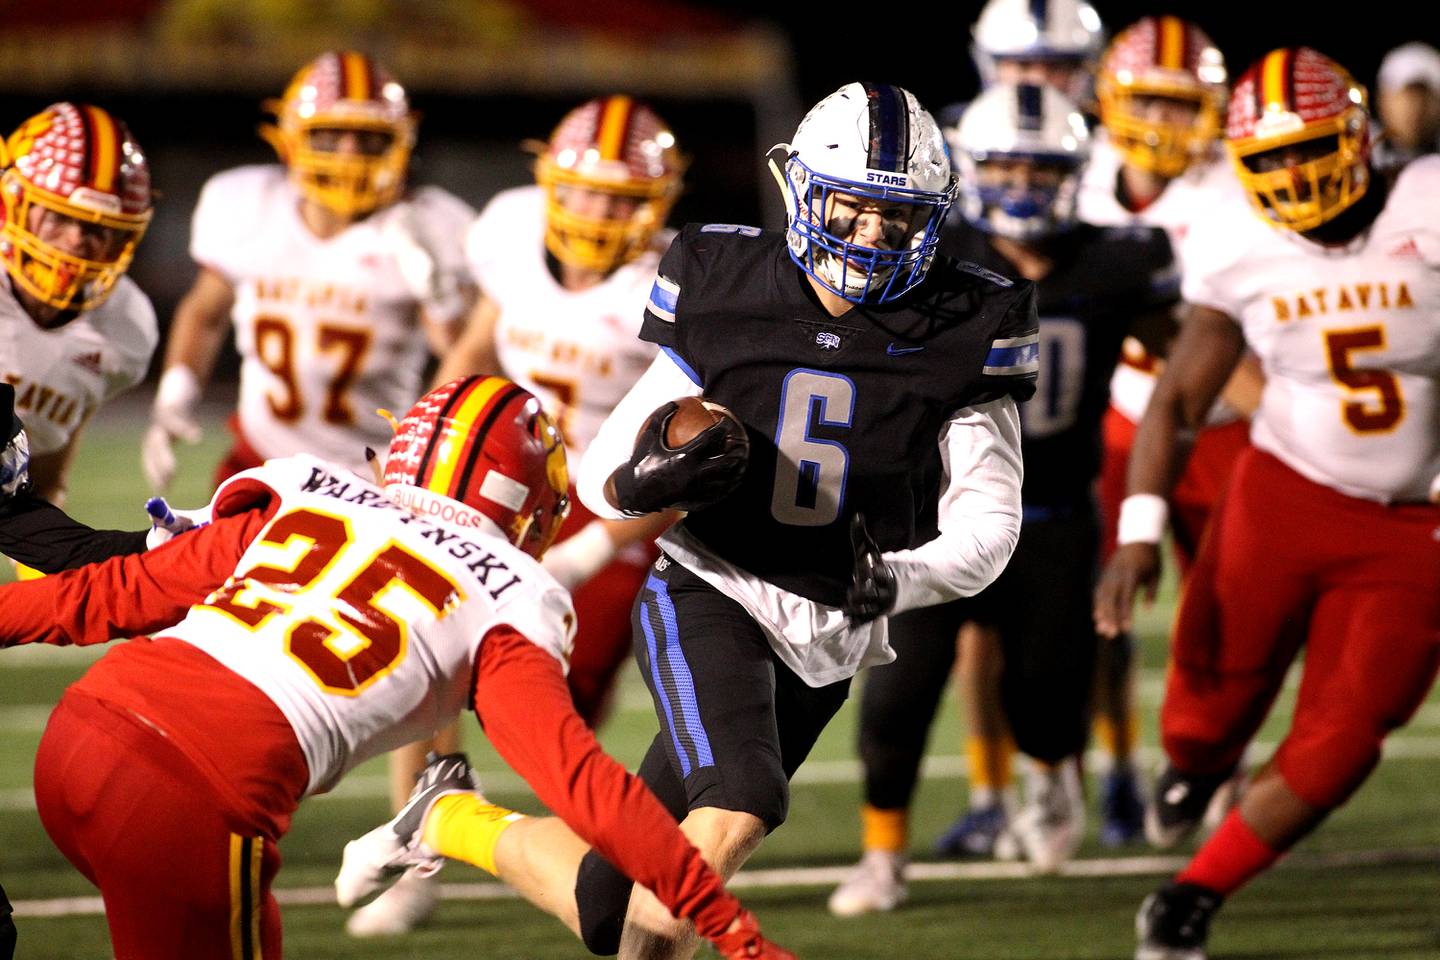 St. Charles North's Drew Surges (6) carries the ball during a game against Batavia at St. Charles North on Friday, Oct. 22, 2021.